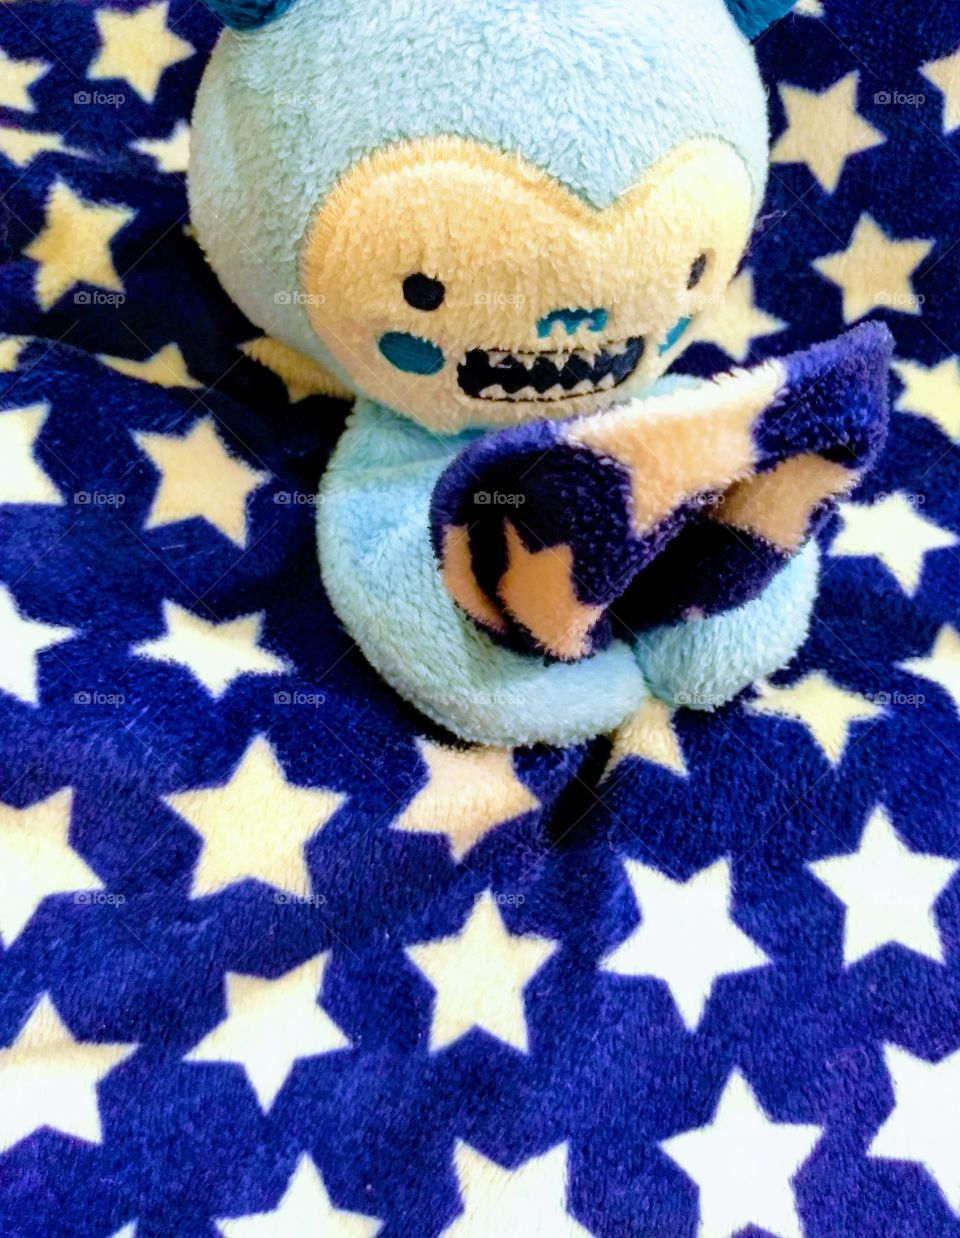 baby monster toy with stars